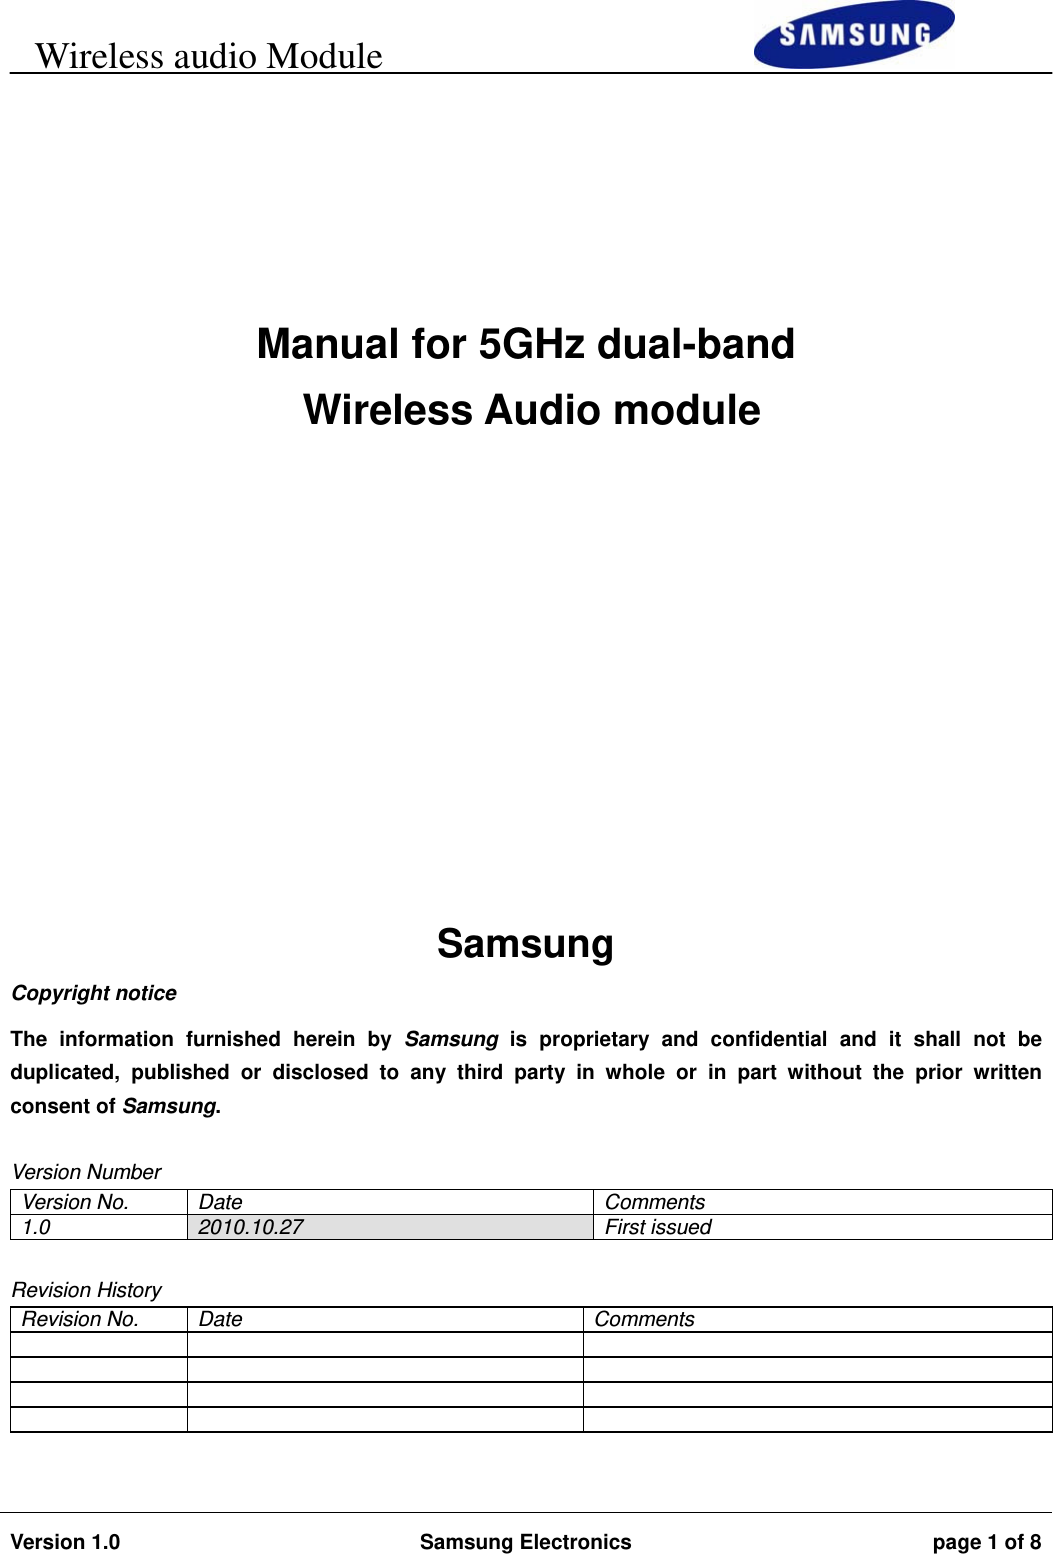     Wireless audio Module                                                                        Version 1.0  Samsung Electronics  page 1 of 8          Manual for 5GHz dual-band  Wireless Audio module        Samsung Copyright notice The information furnished herein by Samsung is proprietary and confidential and it shall not be duplicated, published or disclosed to any third party in whole or in part without the prior written consent of Samsung.  Version Number Version No.  Date  Comments 1.0  2010.10.27 First issued  Revision History Revision No.  Date  Comments                   